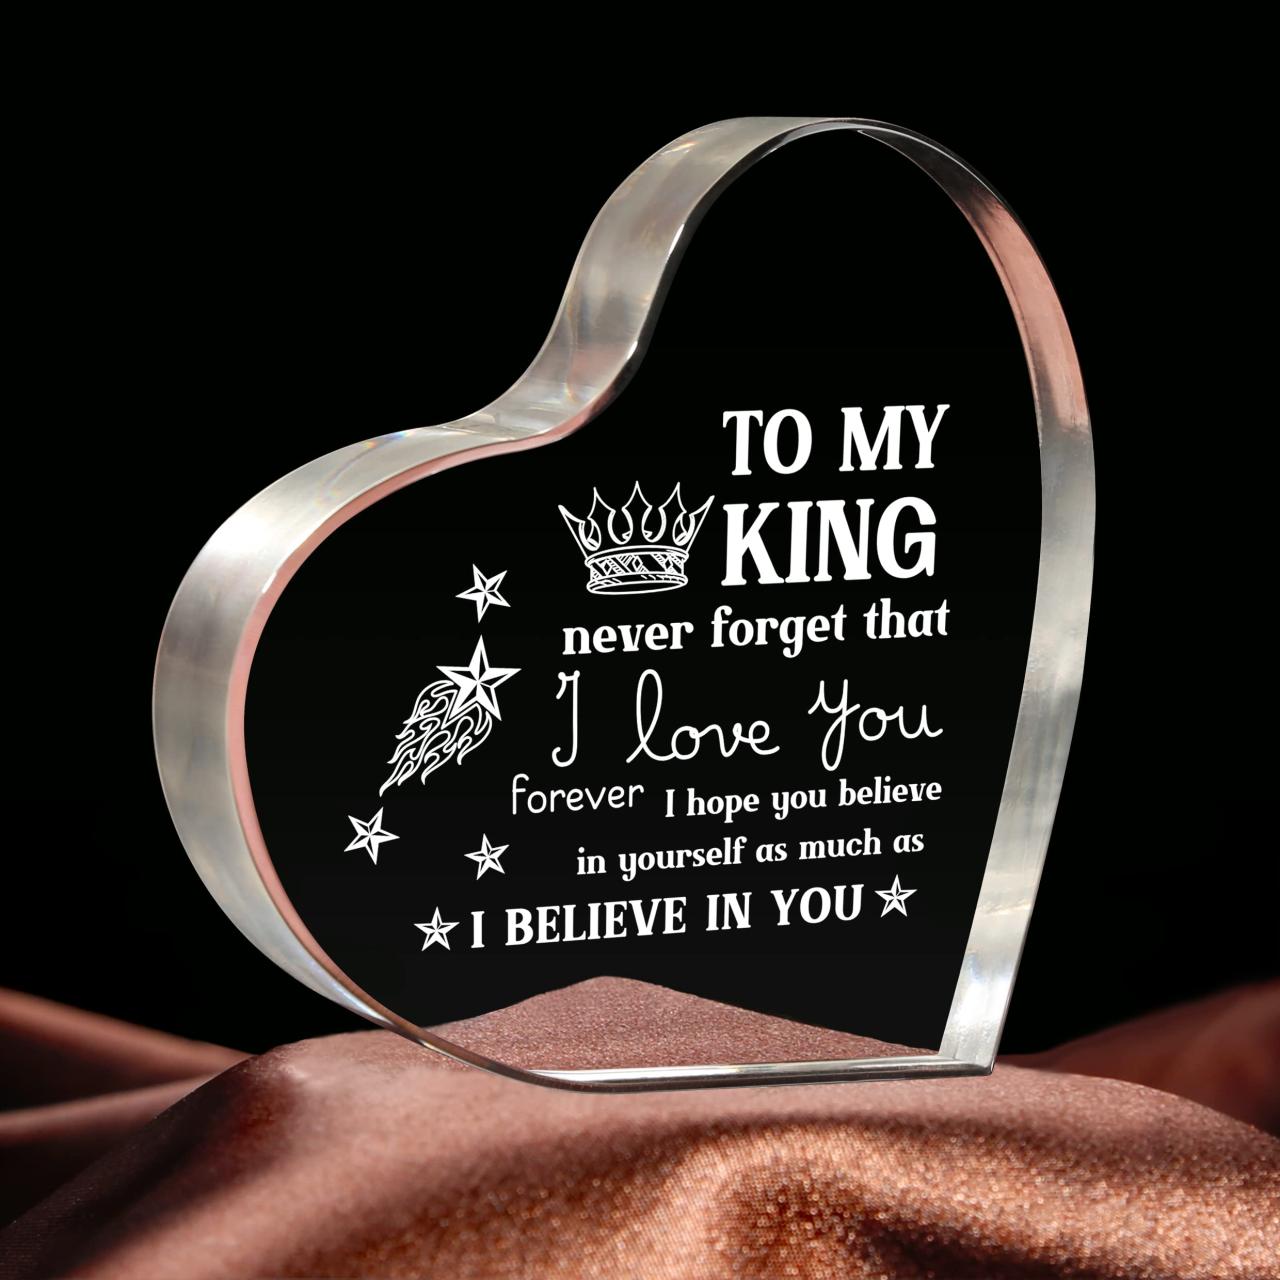 Gifts For Boyfriend, Husband Gifts, Birthday Gifts For Him Boyfriend,  Unique I Love You Mens Acrylic Keepsake - Husband Birthday Gifts,  Anniversary Valentines Day Gifts For Him, To My King : Amazon.Ca: